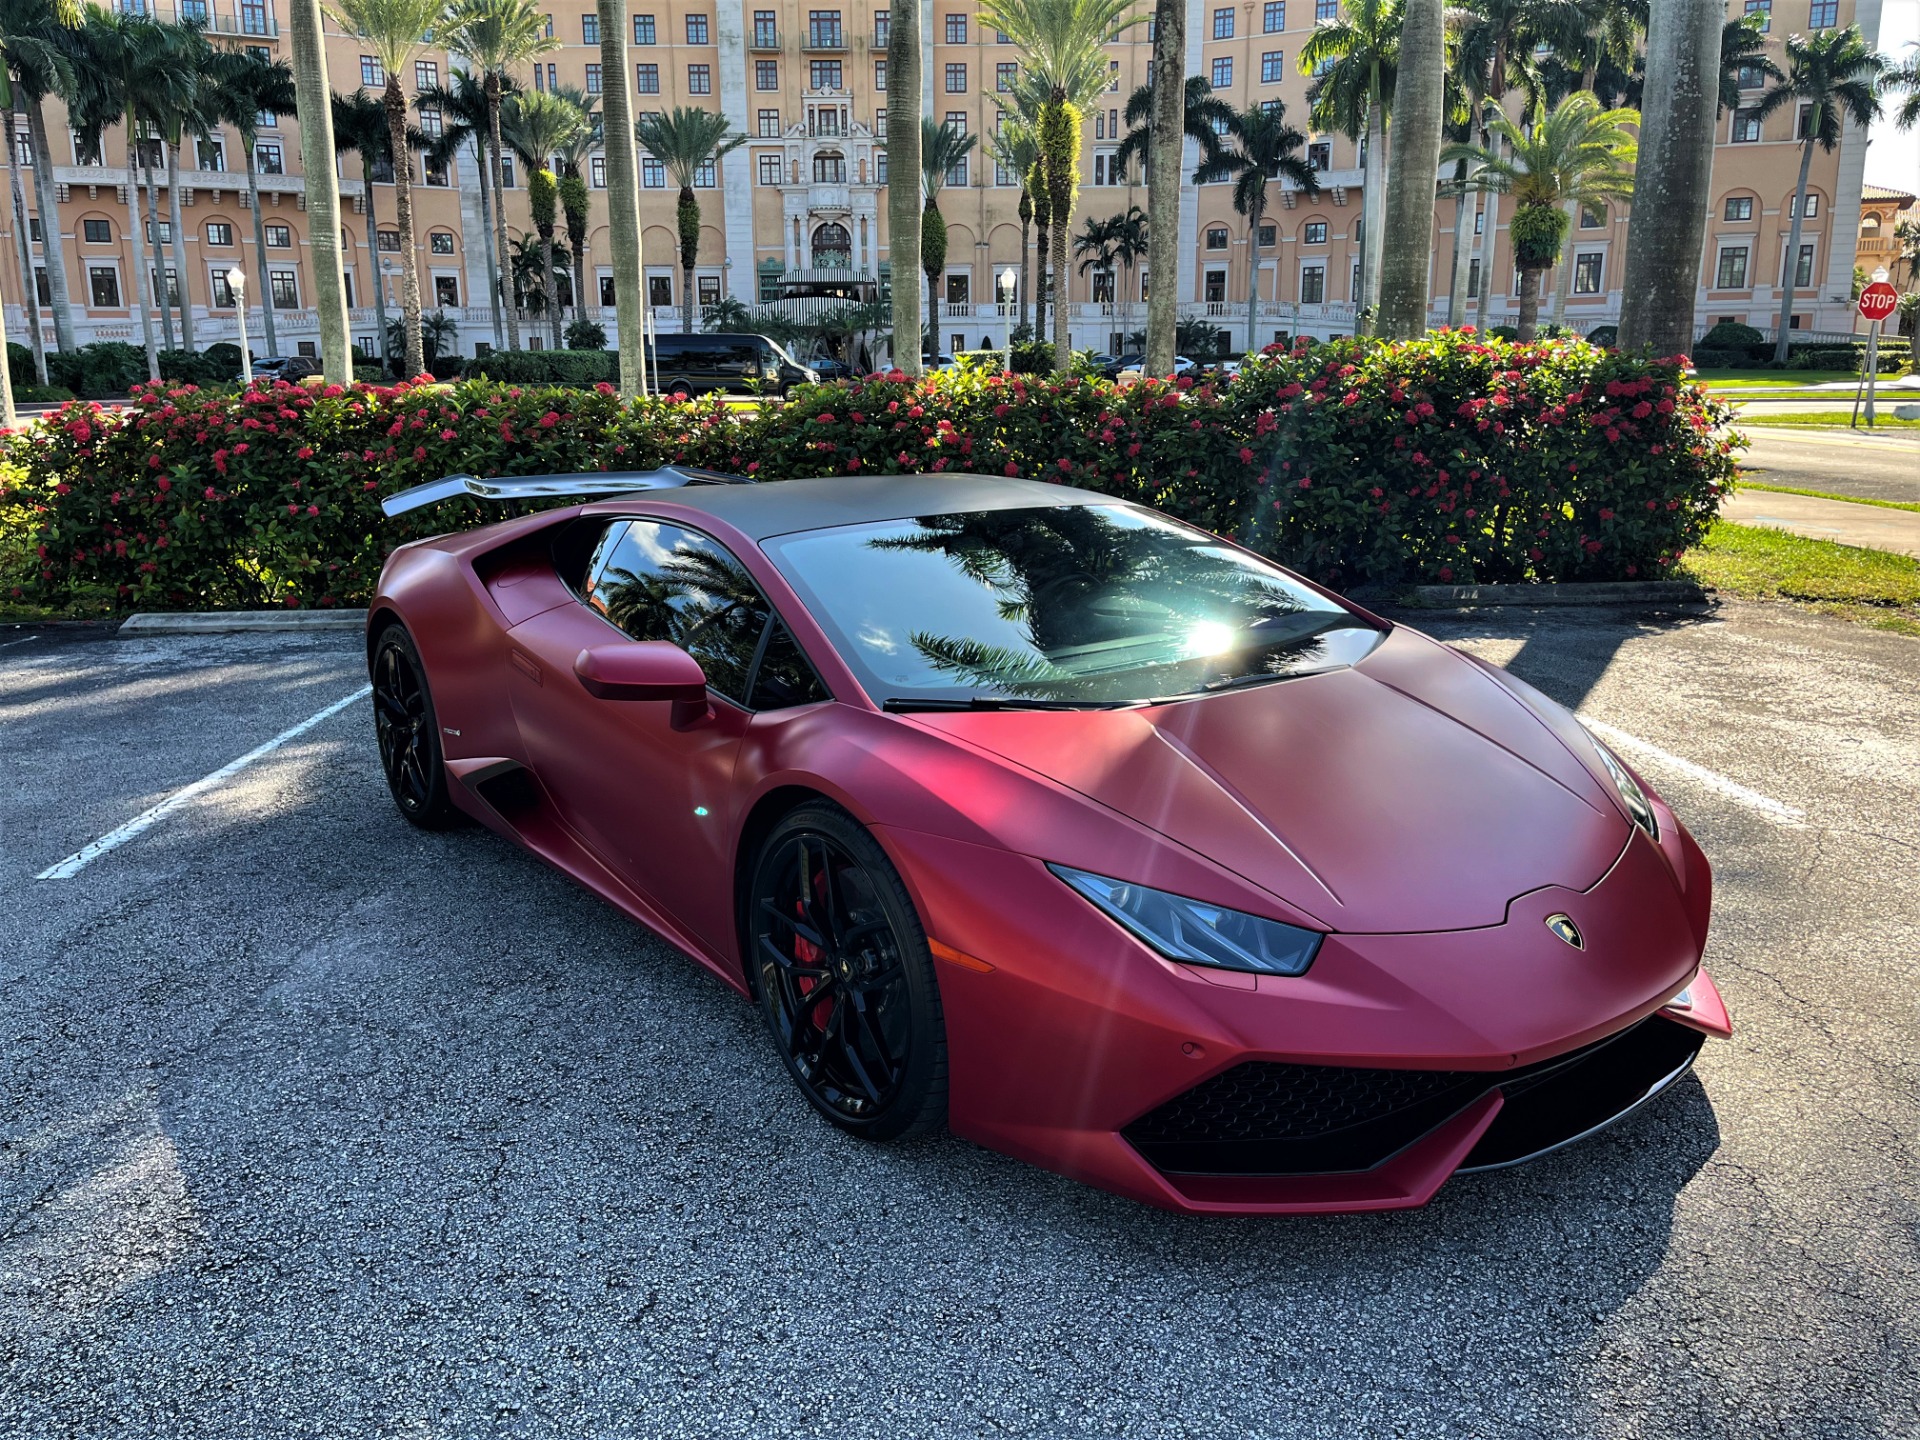 Used 2016 Lamborghini Huracan LP 610-4 for sale $209,850 at The Gables Sports Cars in Miami FL 33146 2